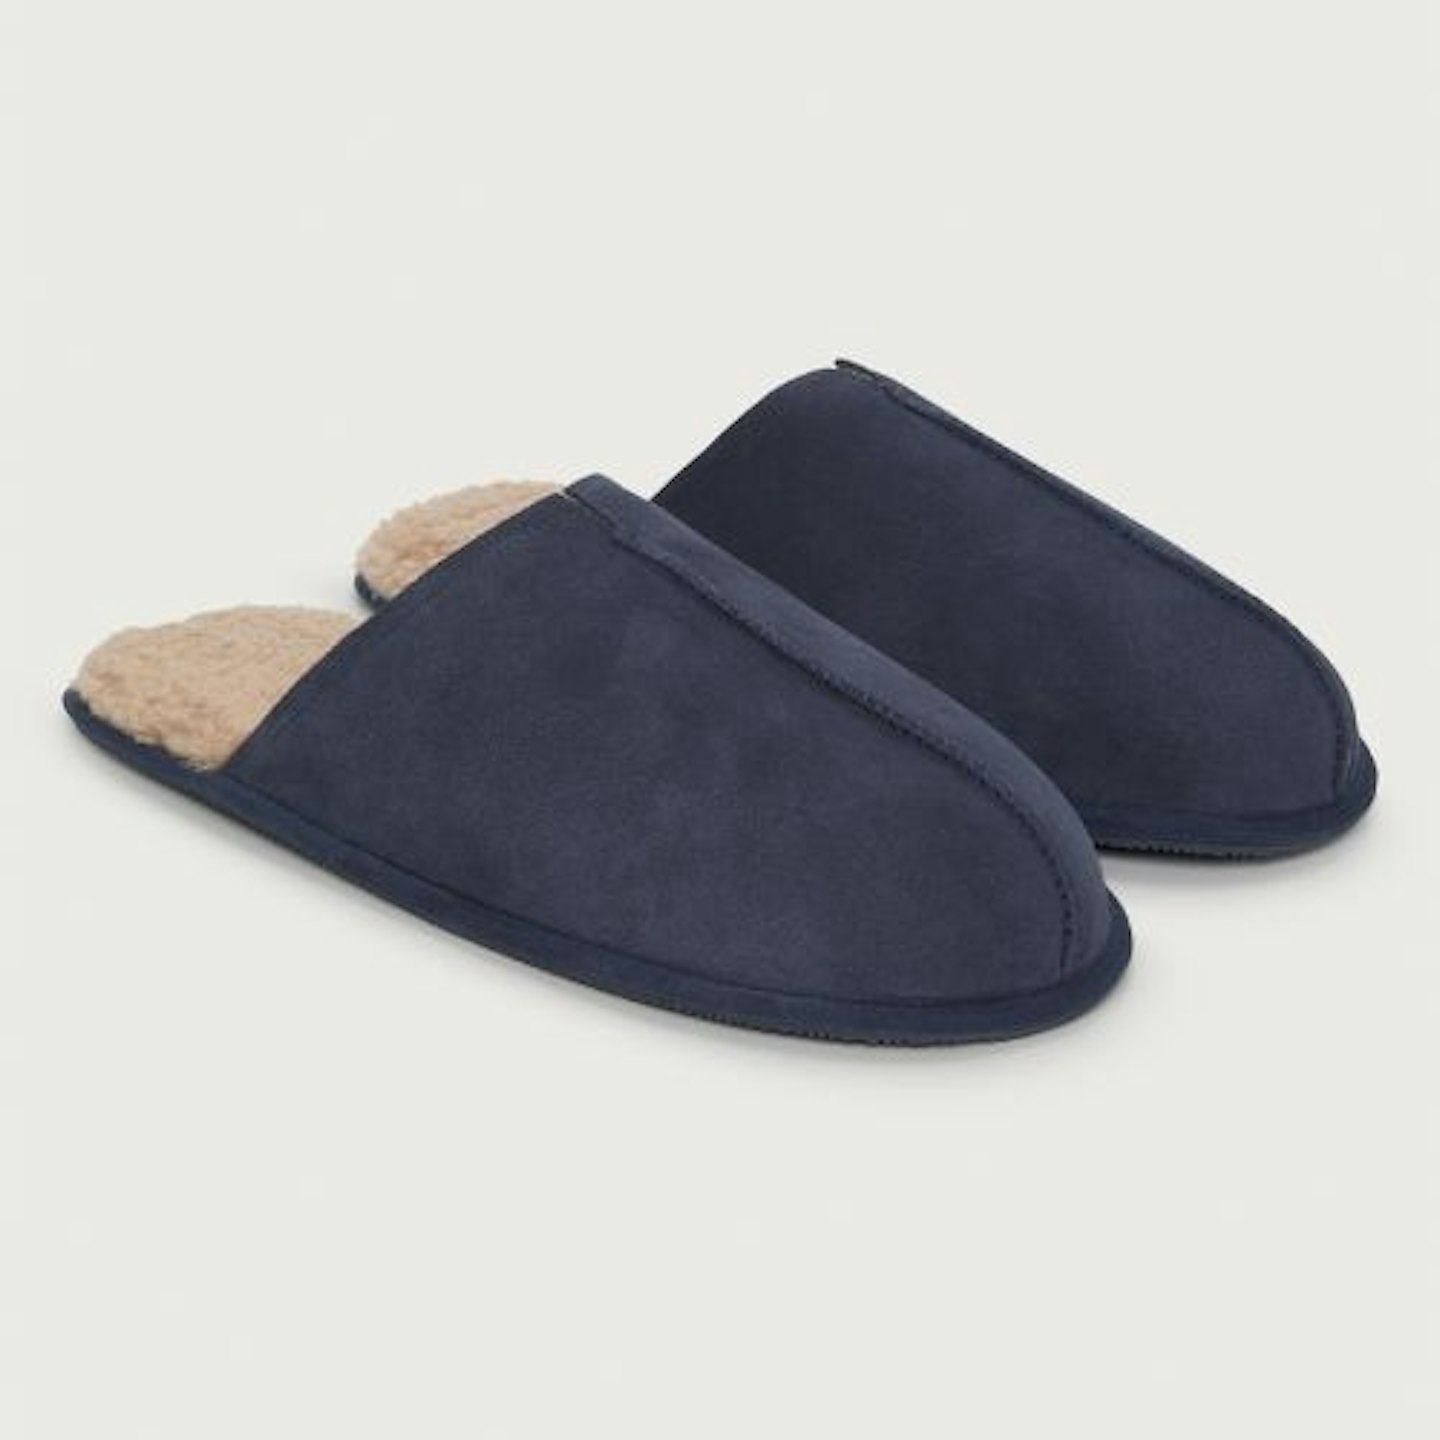 The White Company Men’s Suede Mule Slippers